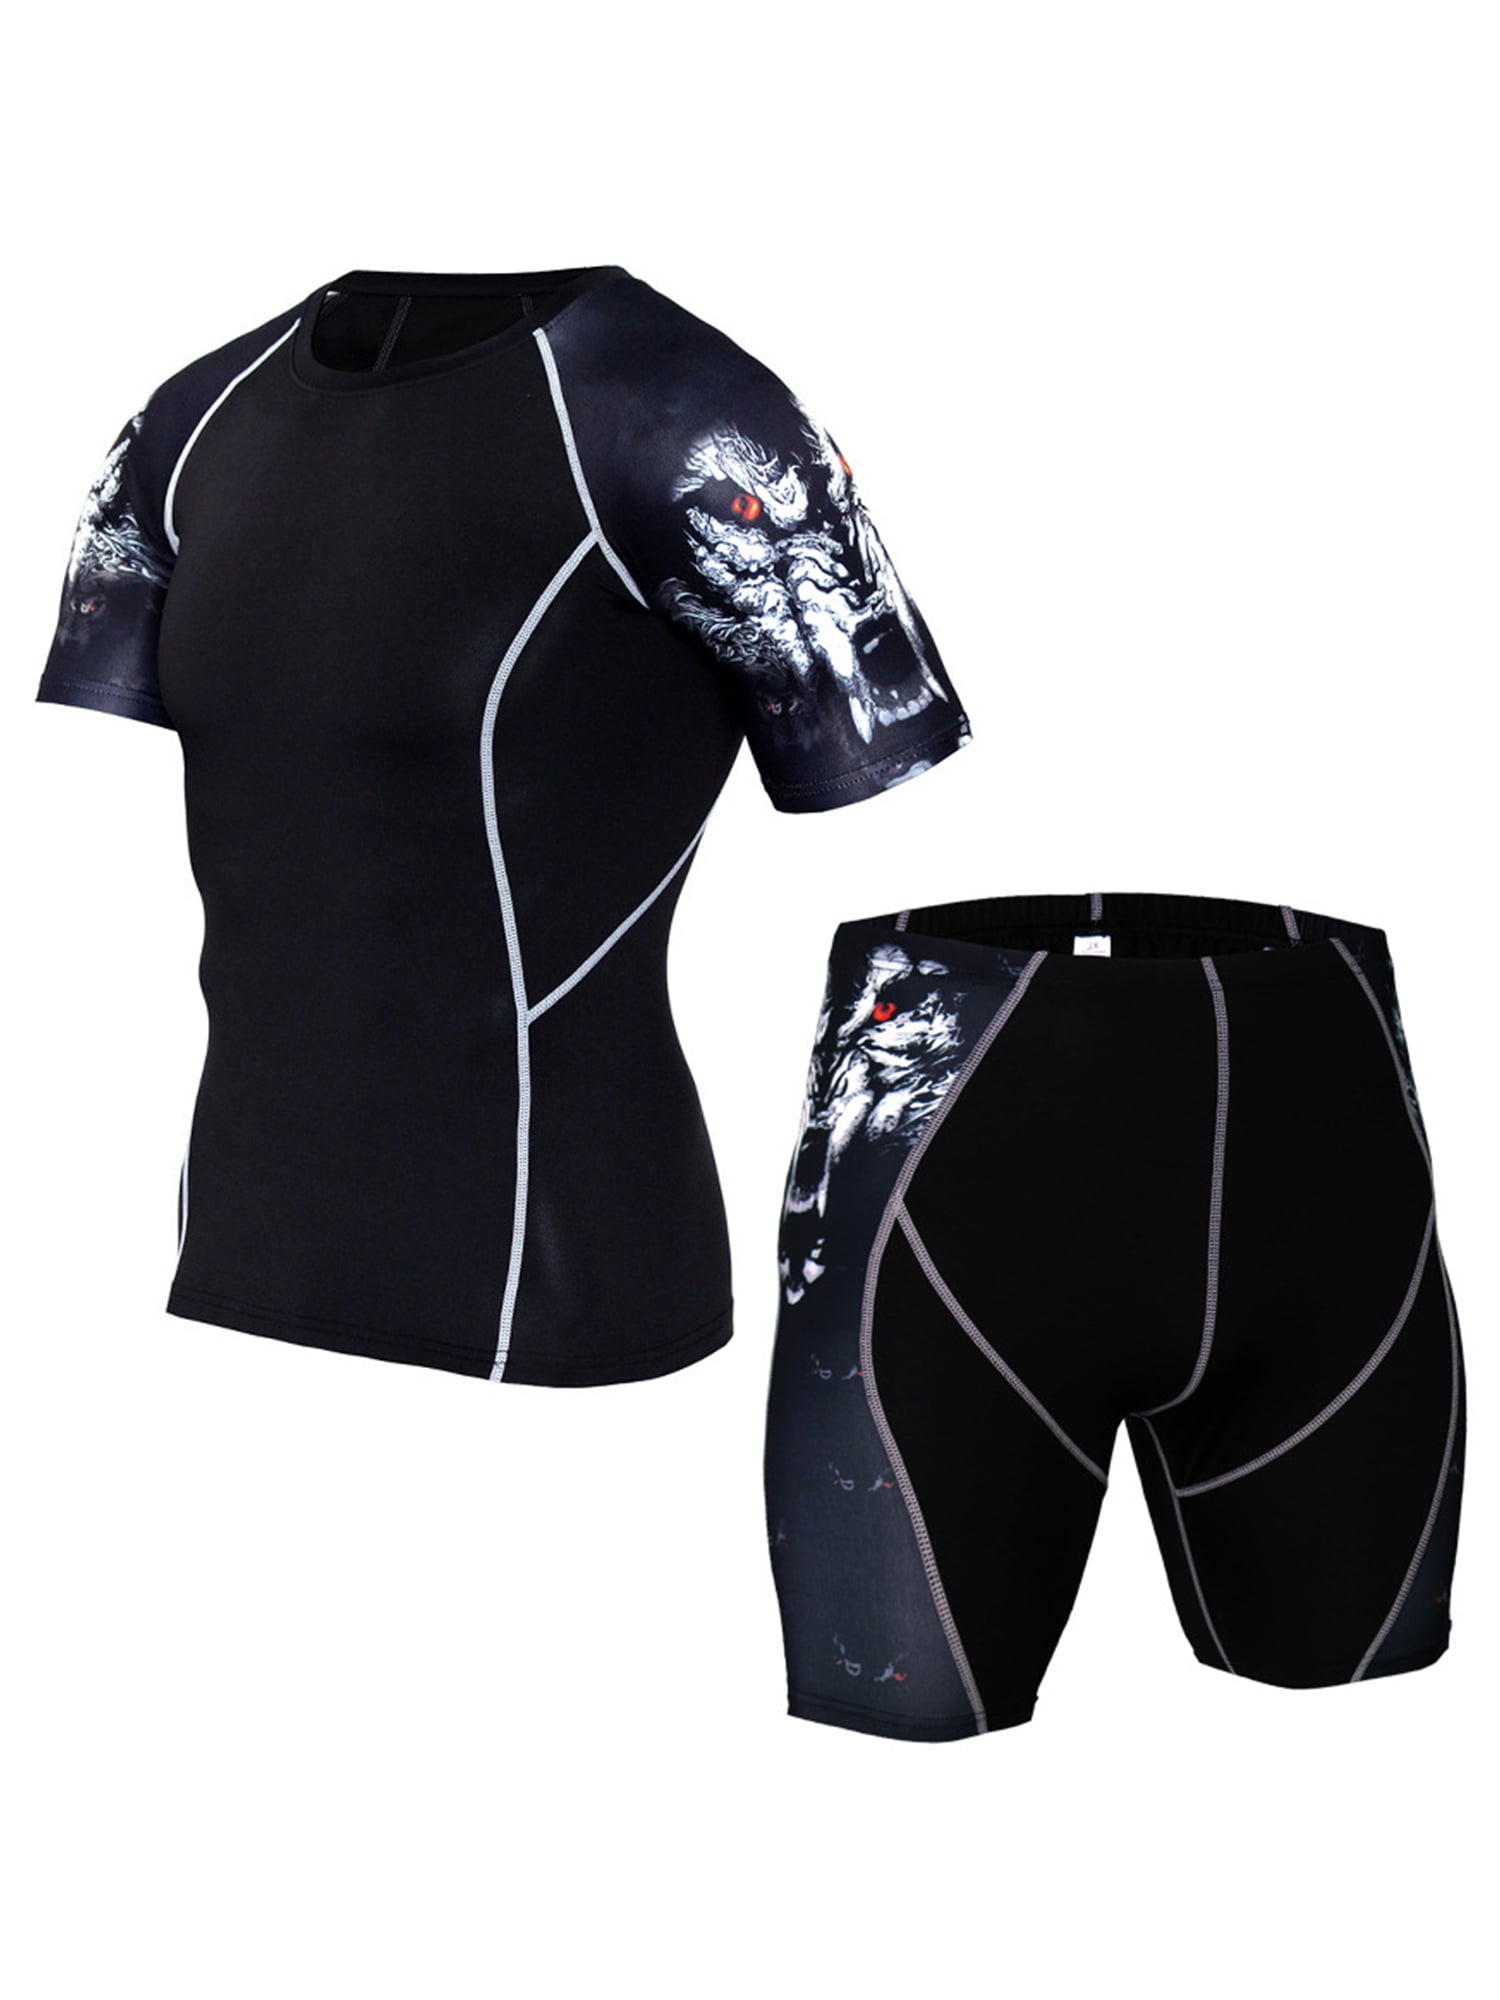 Men's Compression Shirts Gym Workout Running Shorts Tight fit Printed Cool Dry 